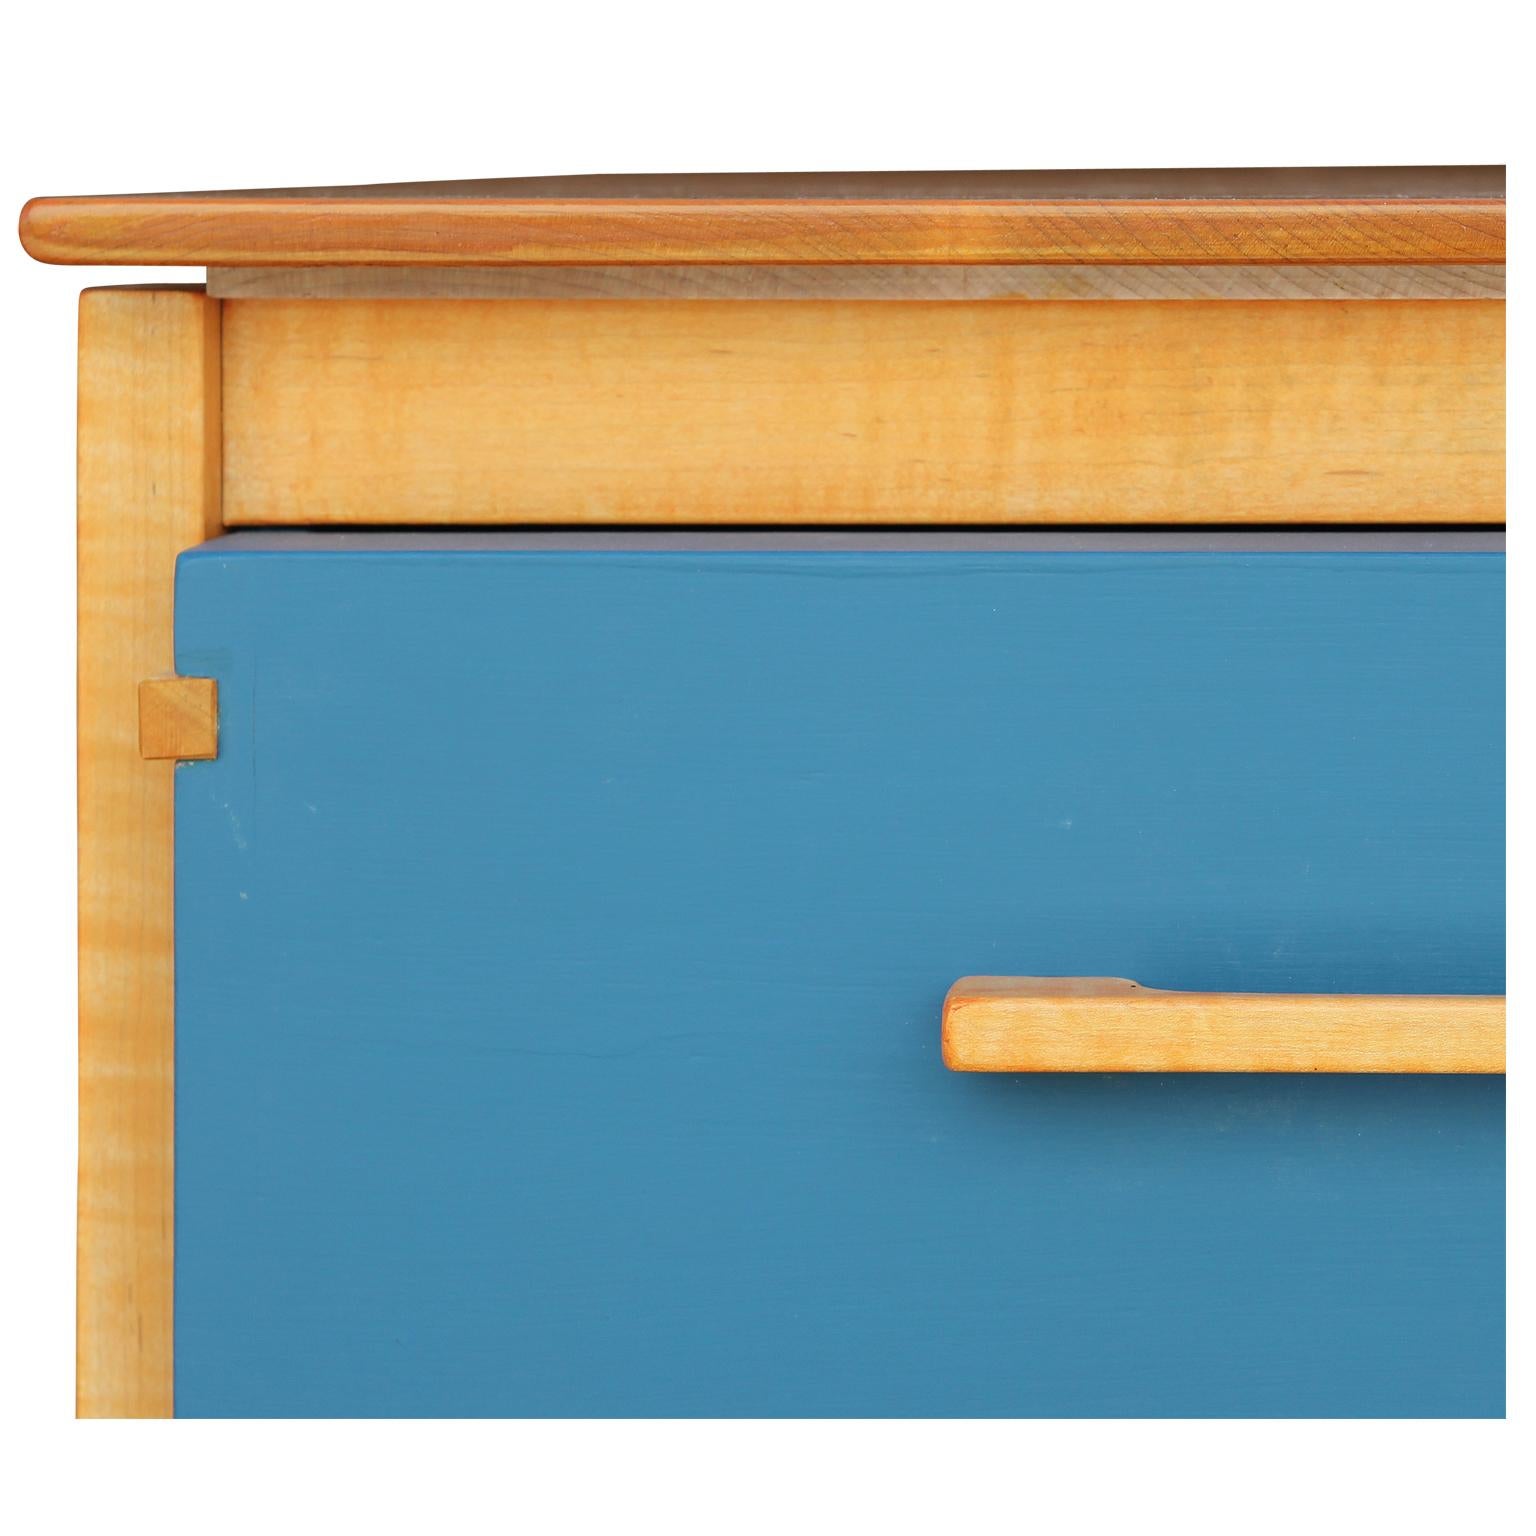 Stunning custom Scandinavian modern small chest by norm stoeker. The three exposed Egyptian blue drawers are made with master craftsmanship surrounded by satin maple. The dovetailed construction adds interest from all angles. Stunning in person,